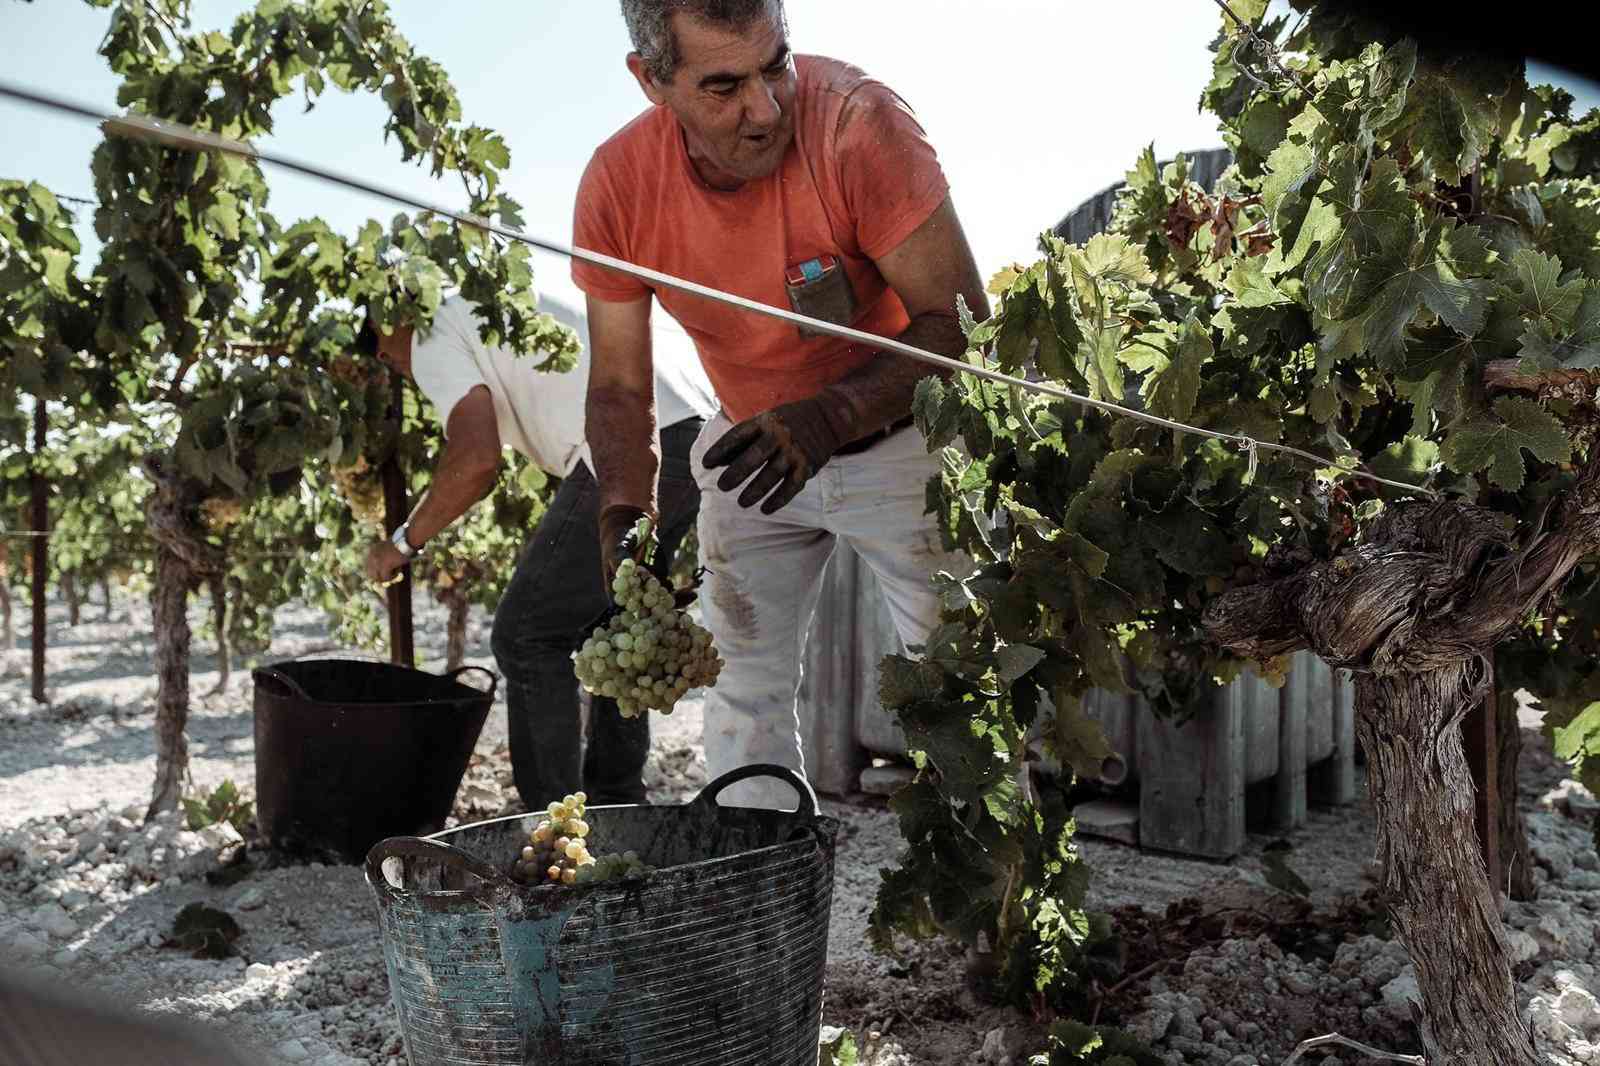 The Grape Harvest: Wine culture for the whole family The Grape Harvest